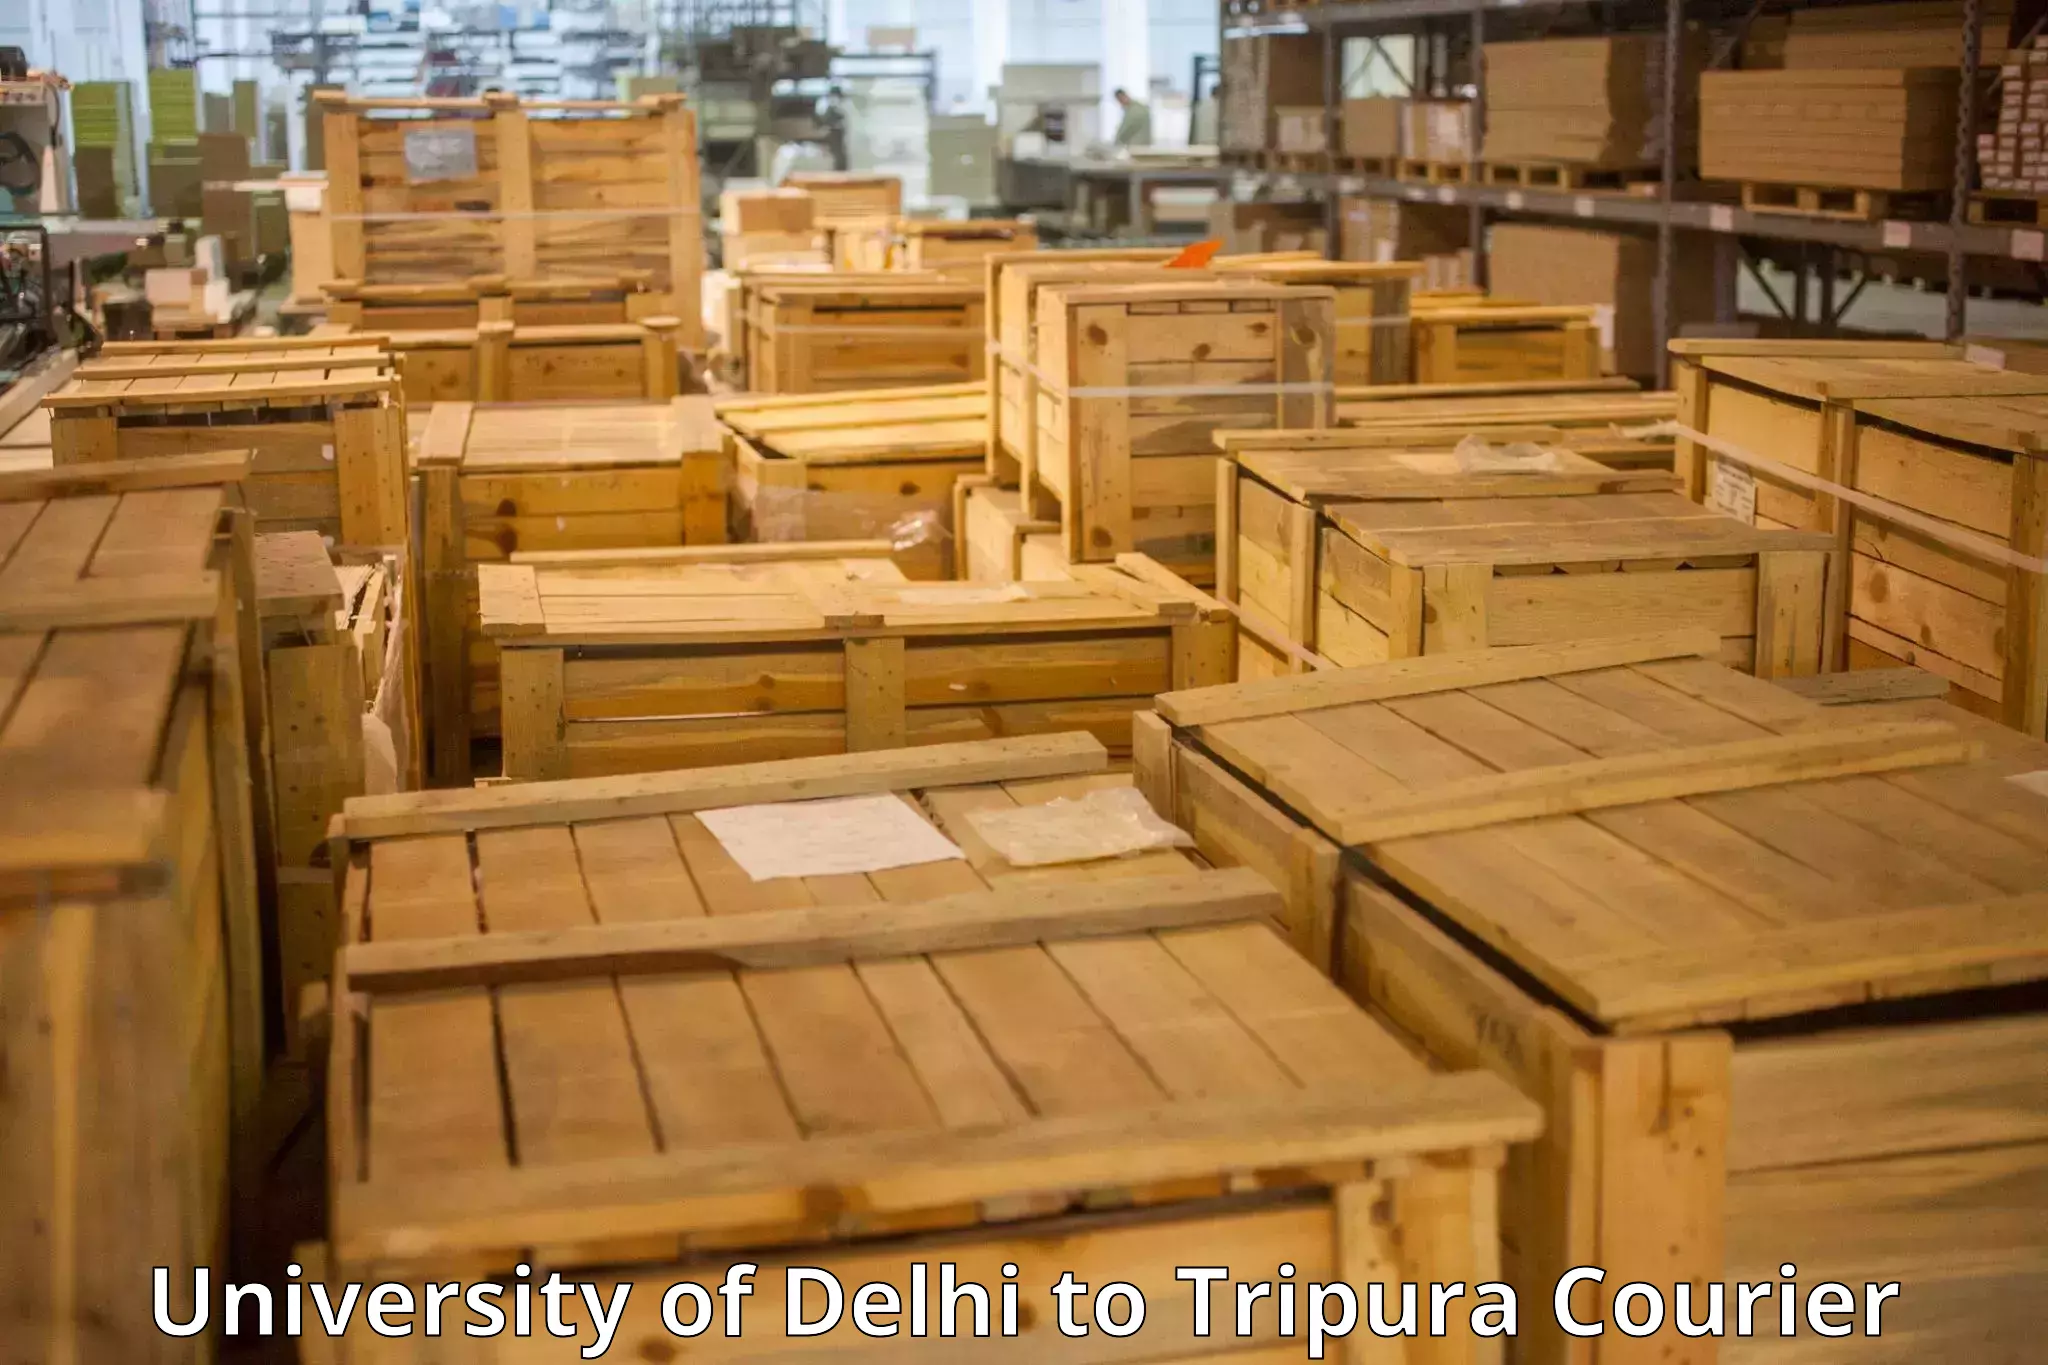 Baggage shipping experience University of Delhi to Udaipur Tripura